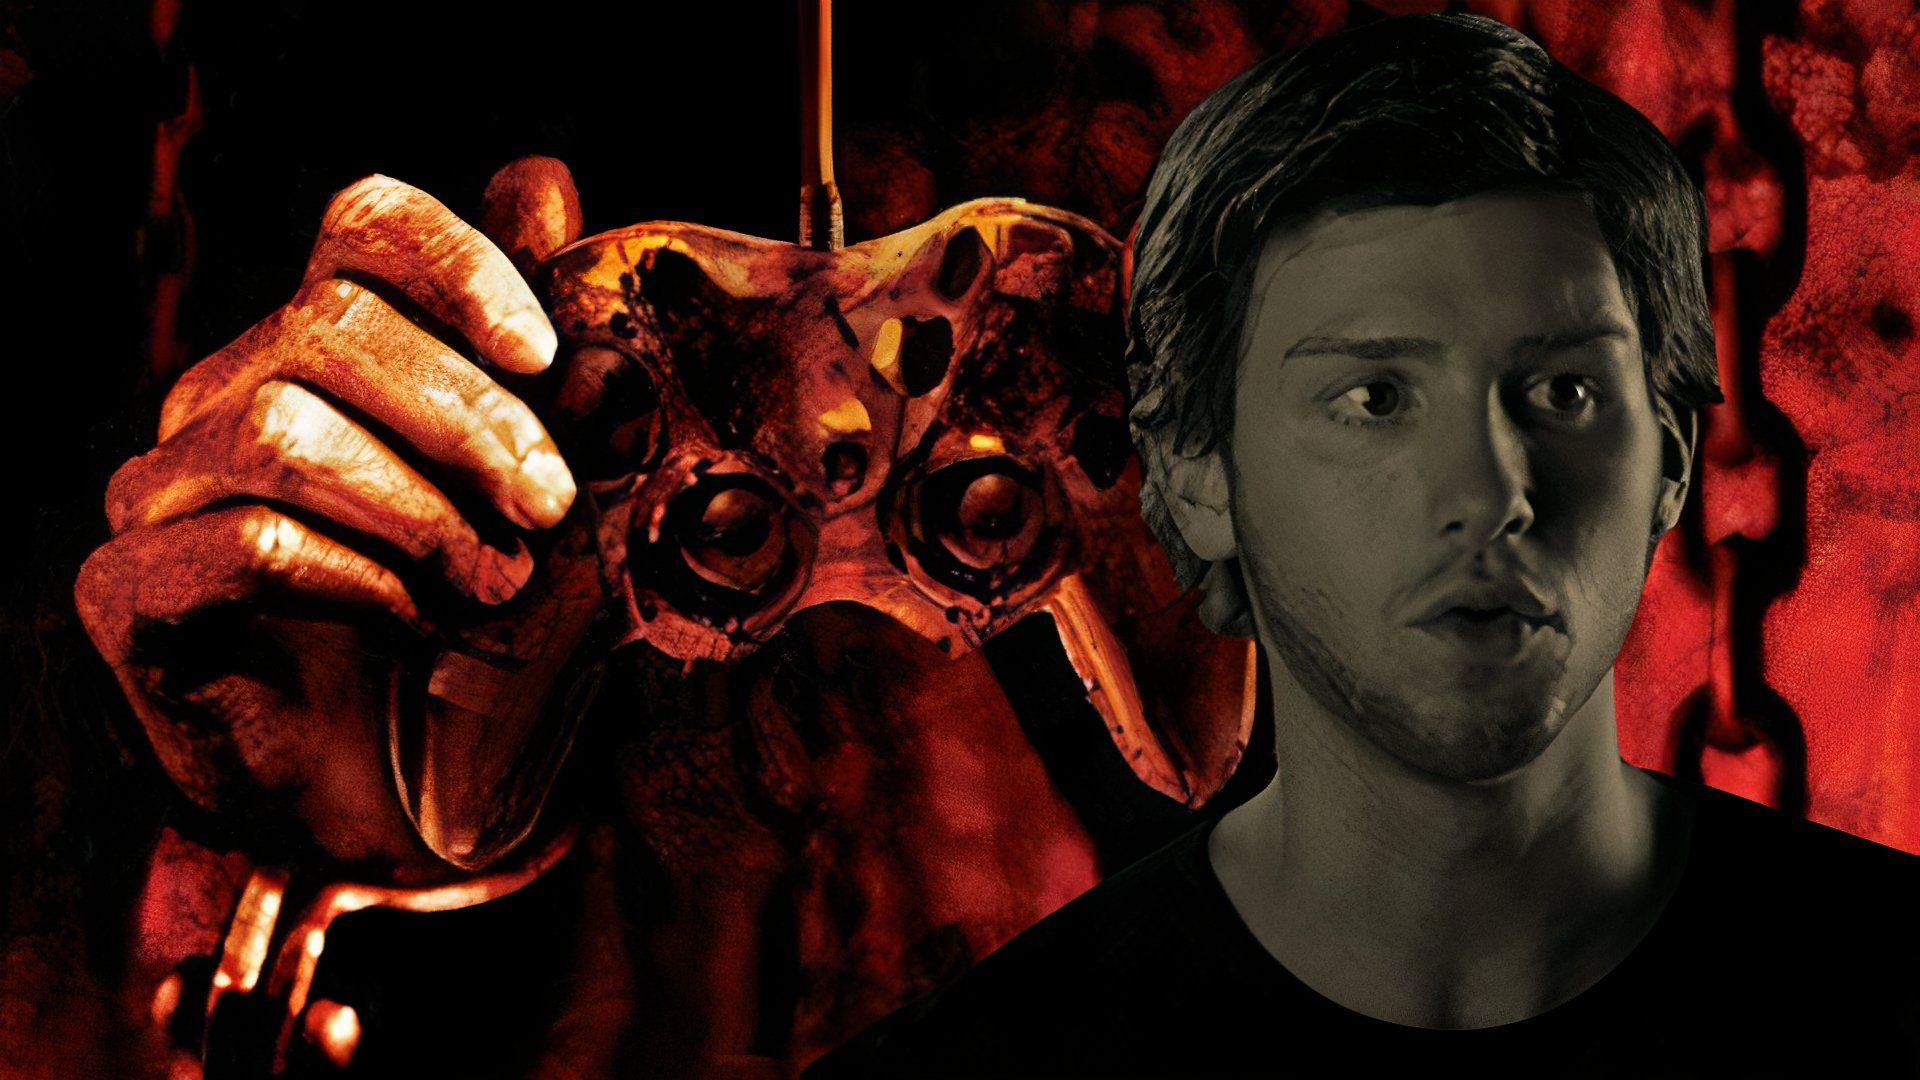 Jon Foster as Hutch with a video game controller behind him in Stay Alive